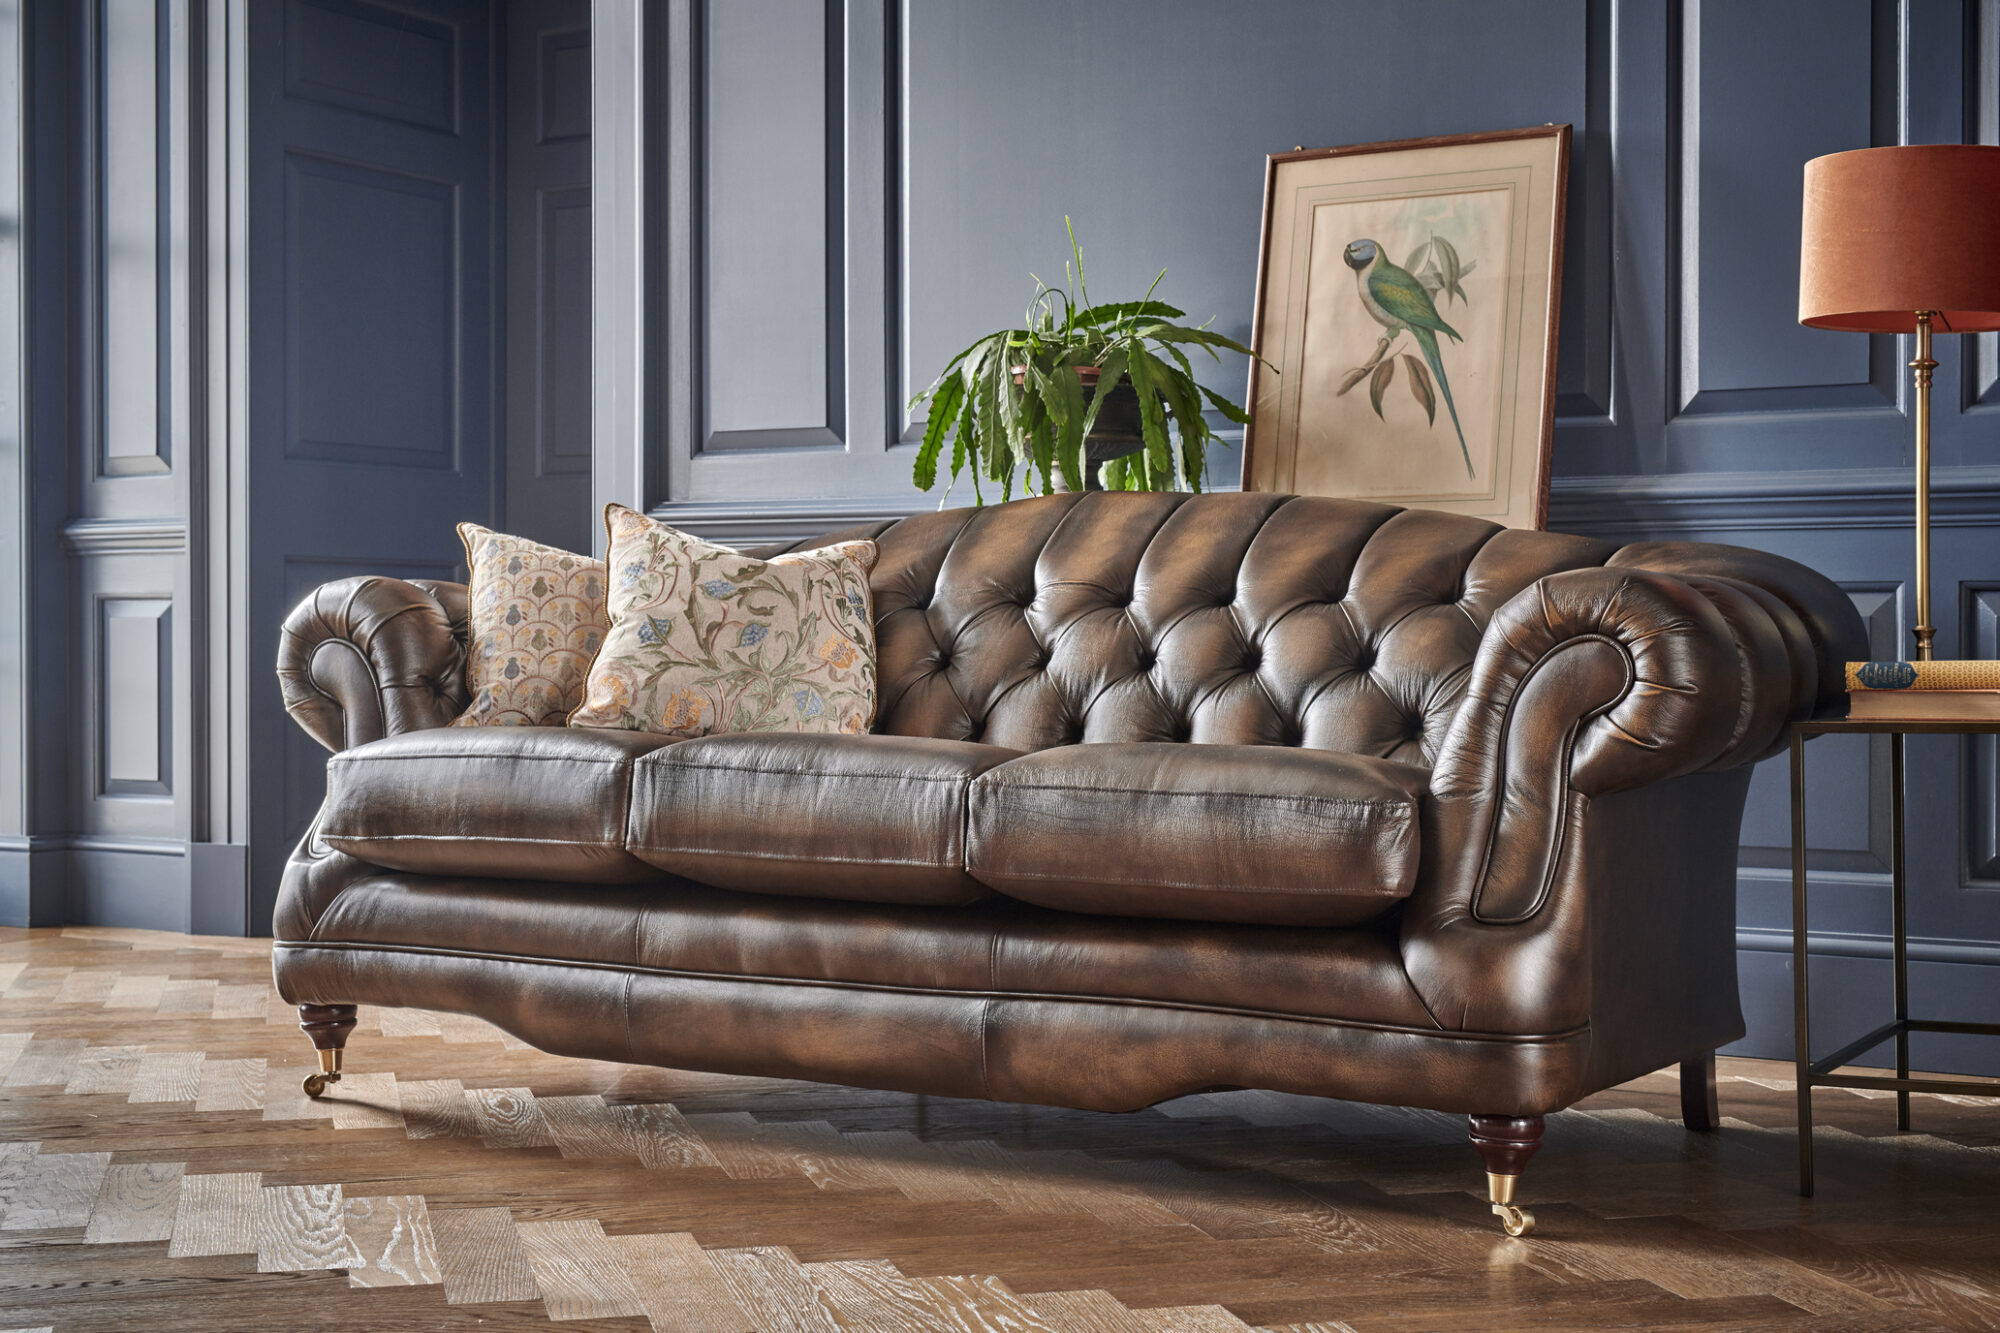 The elegant leathers sofa that will elevate the style of your lounge